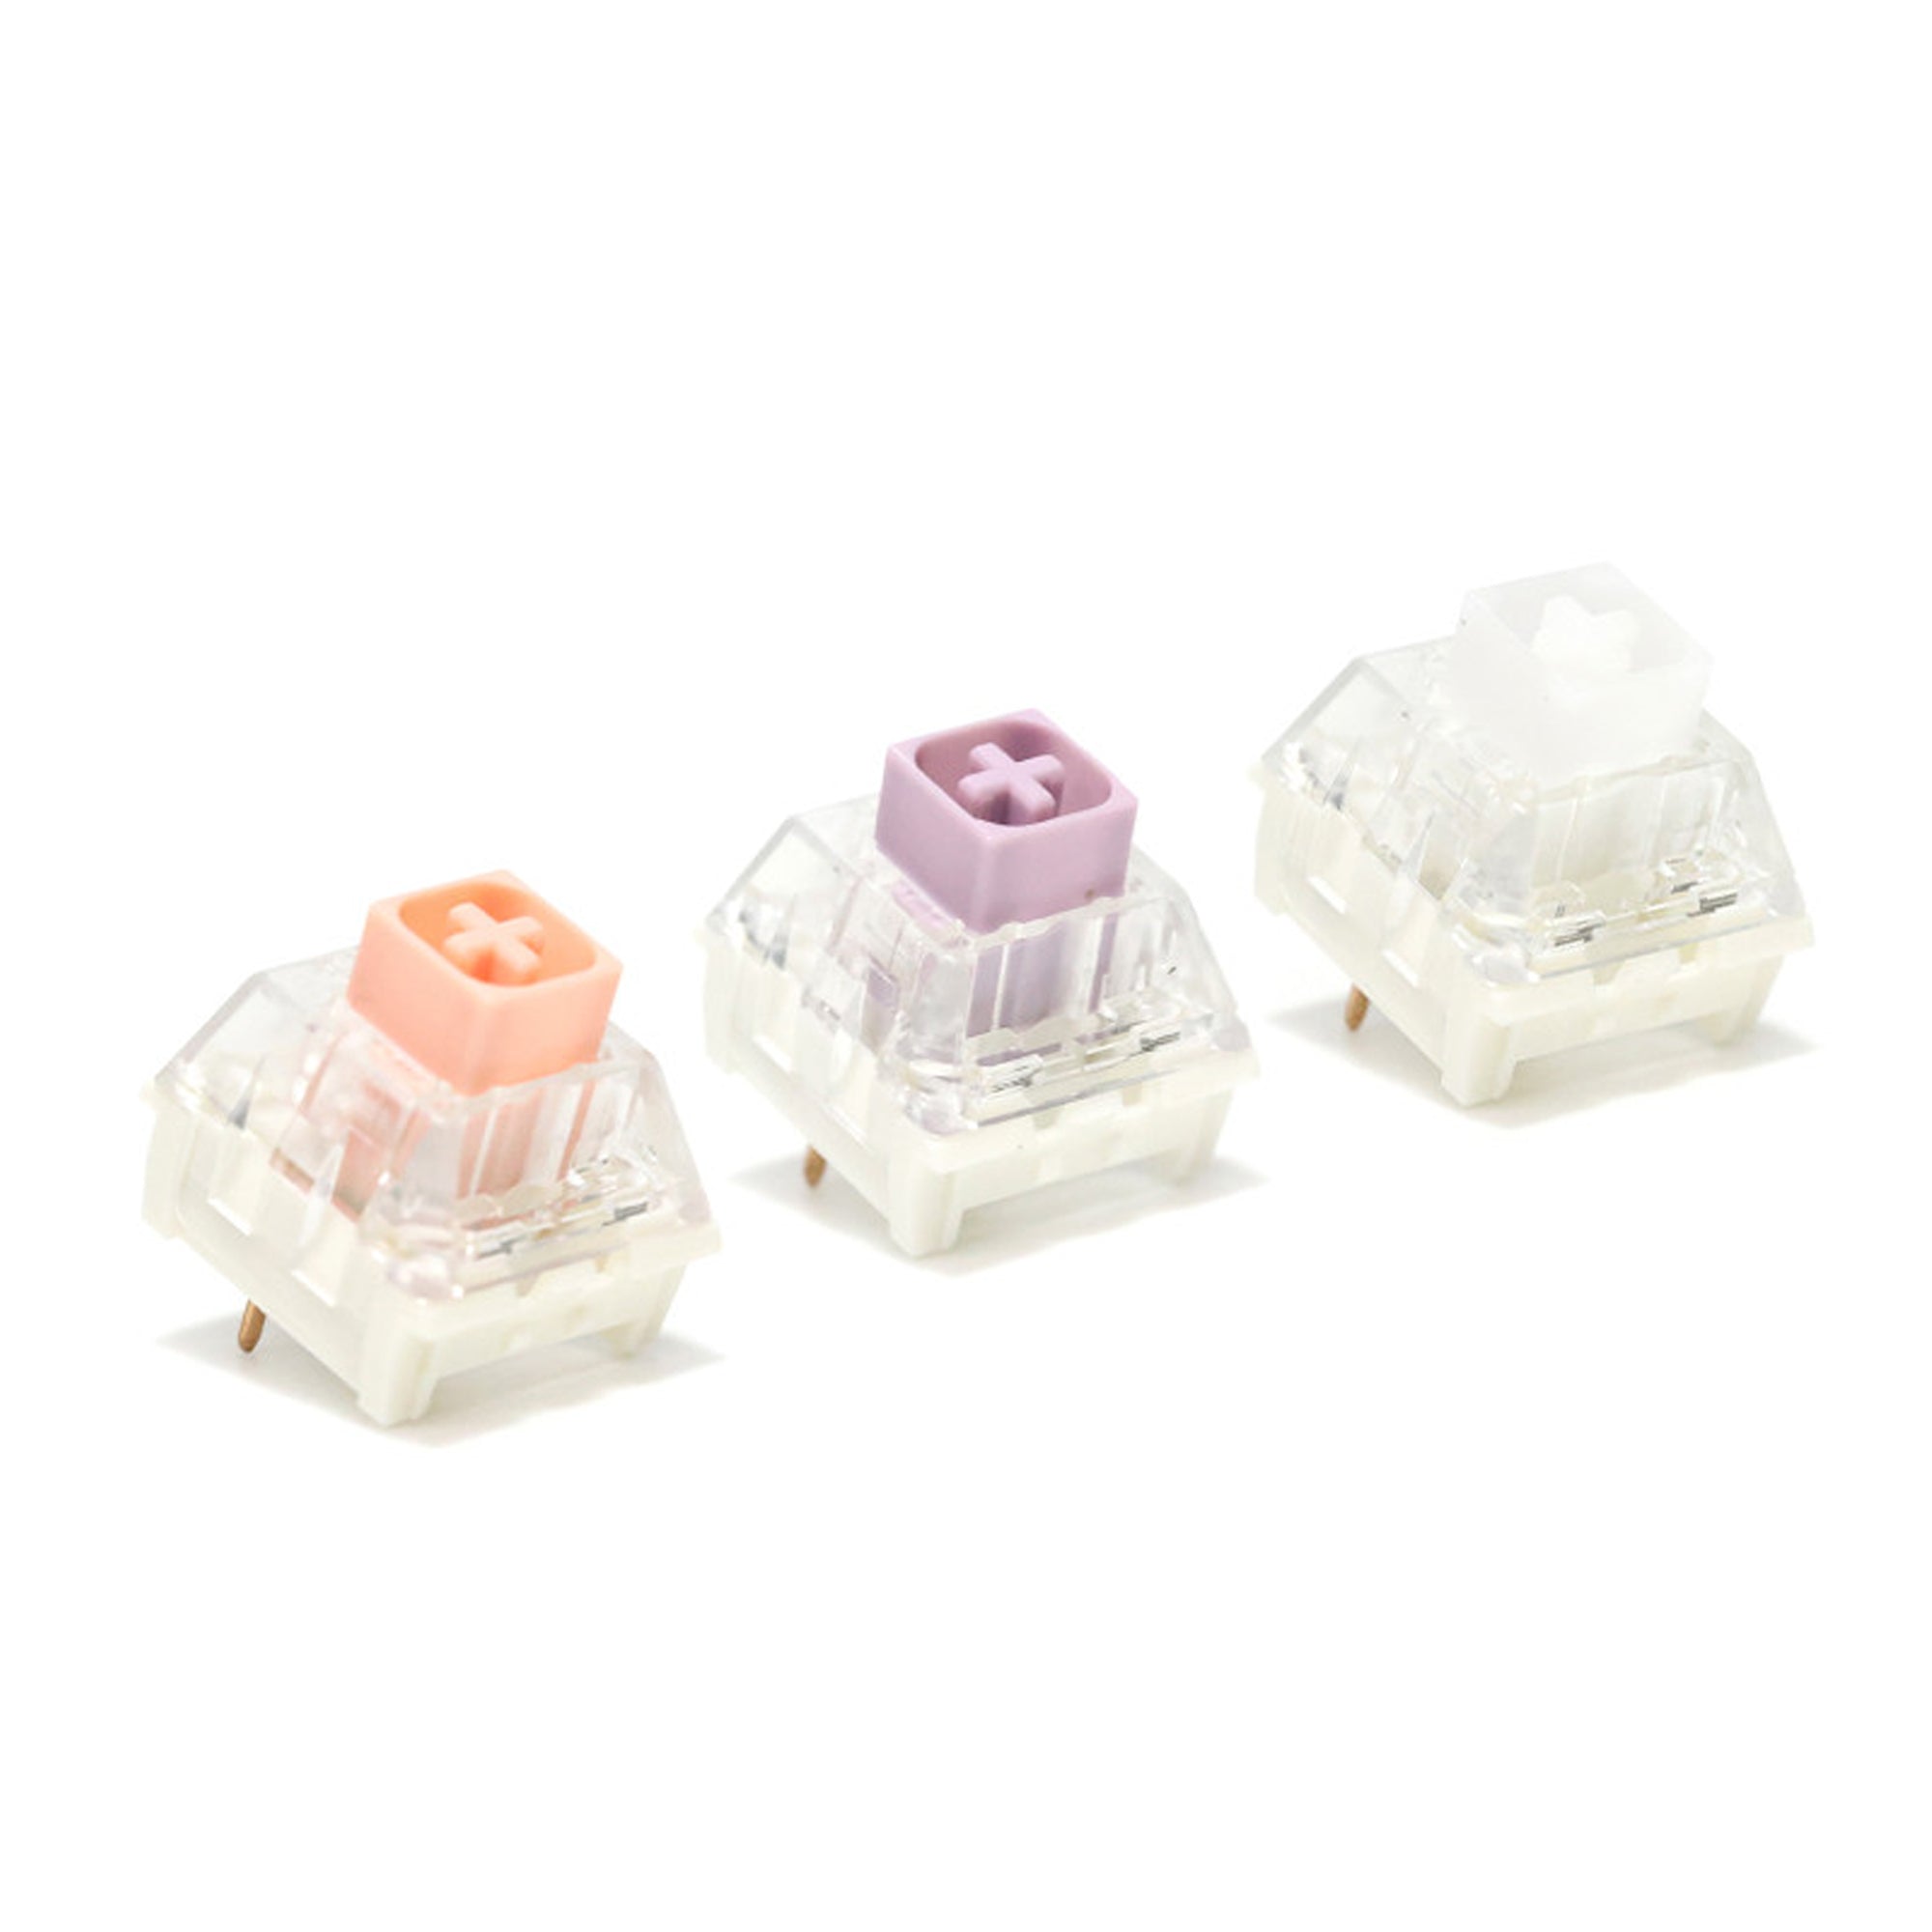 Kailh Hako Clear/True/Violet Switches